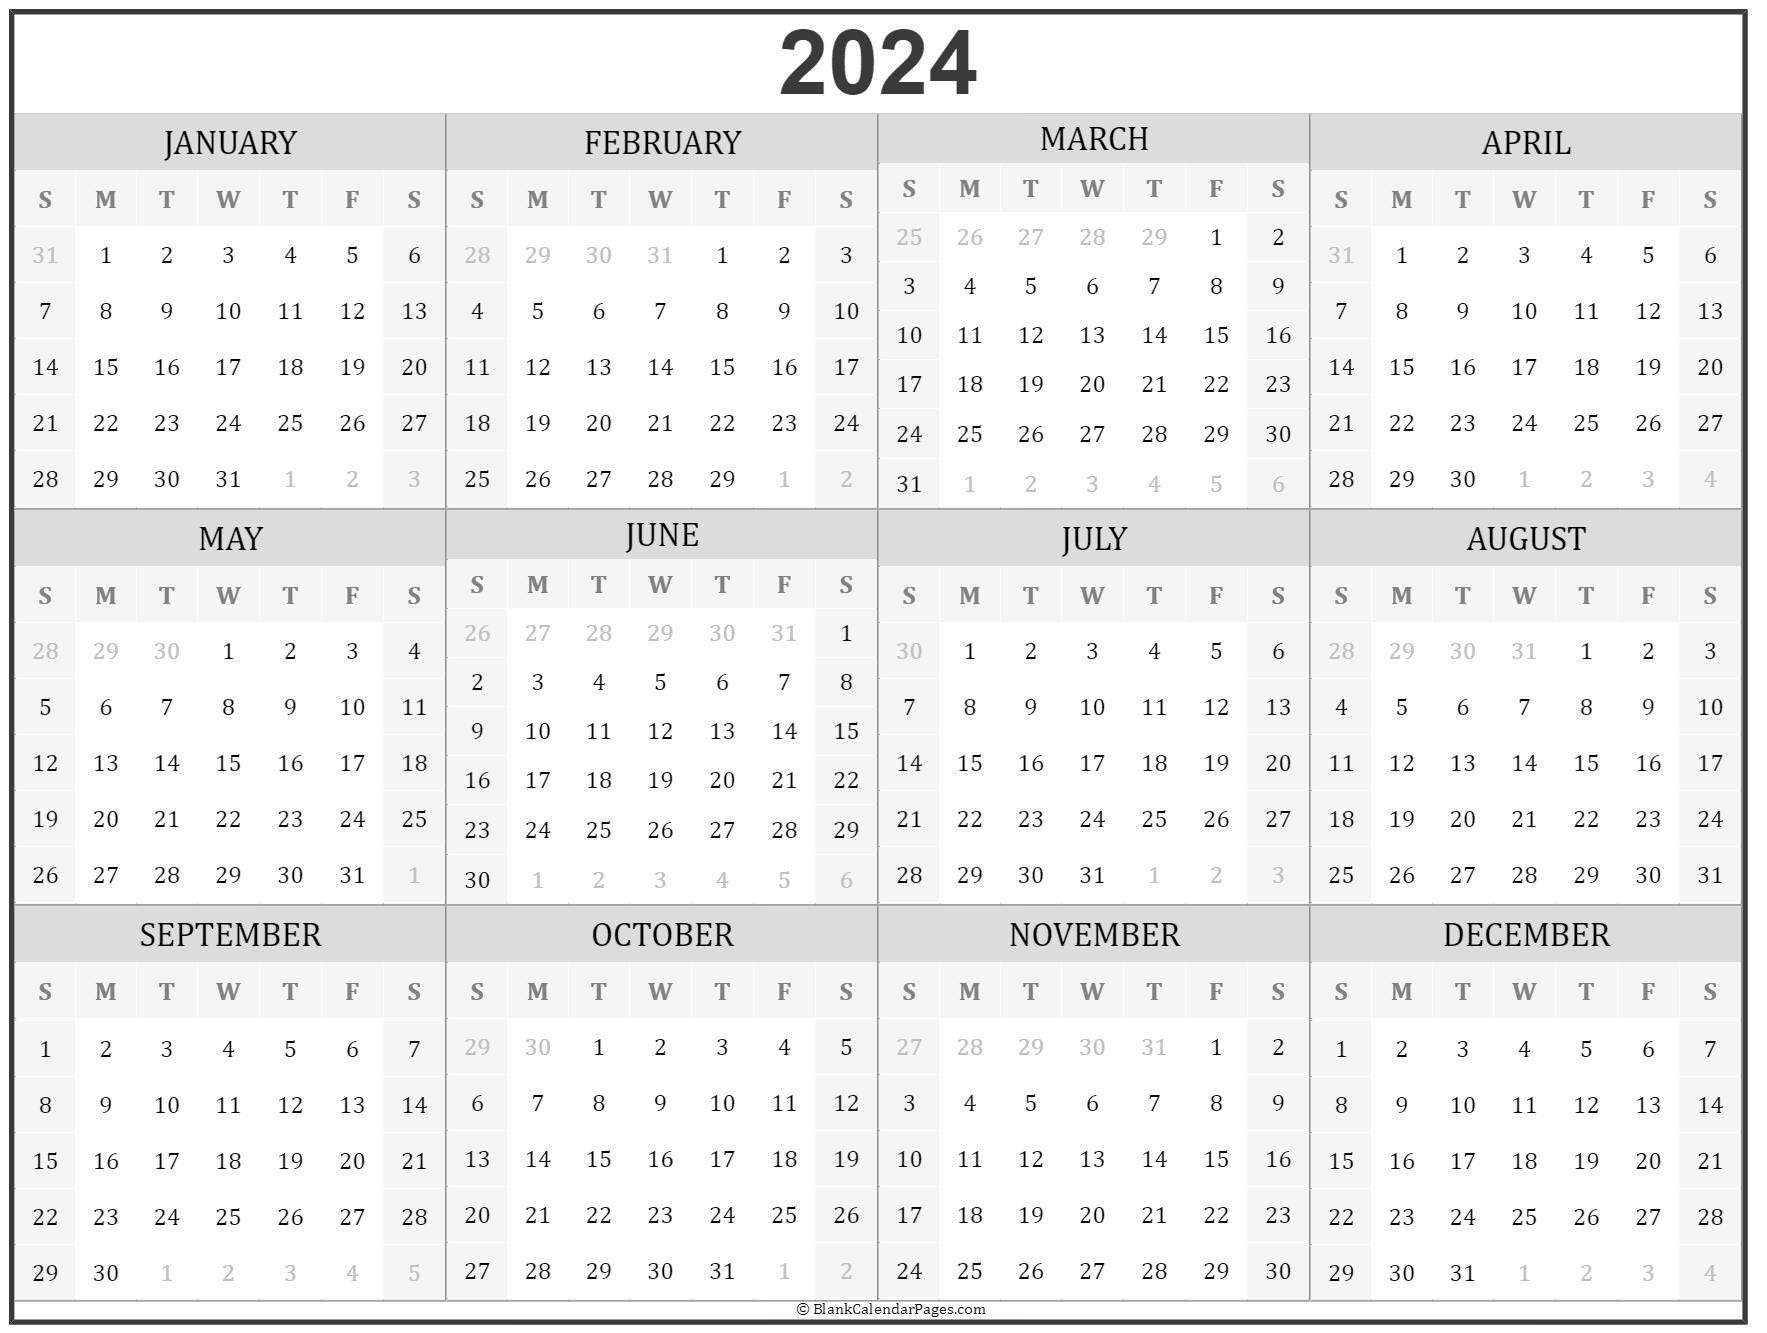 Pitt Calendar 2024 Your Guide to All the Exciting Events and Deadlines